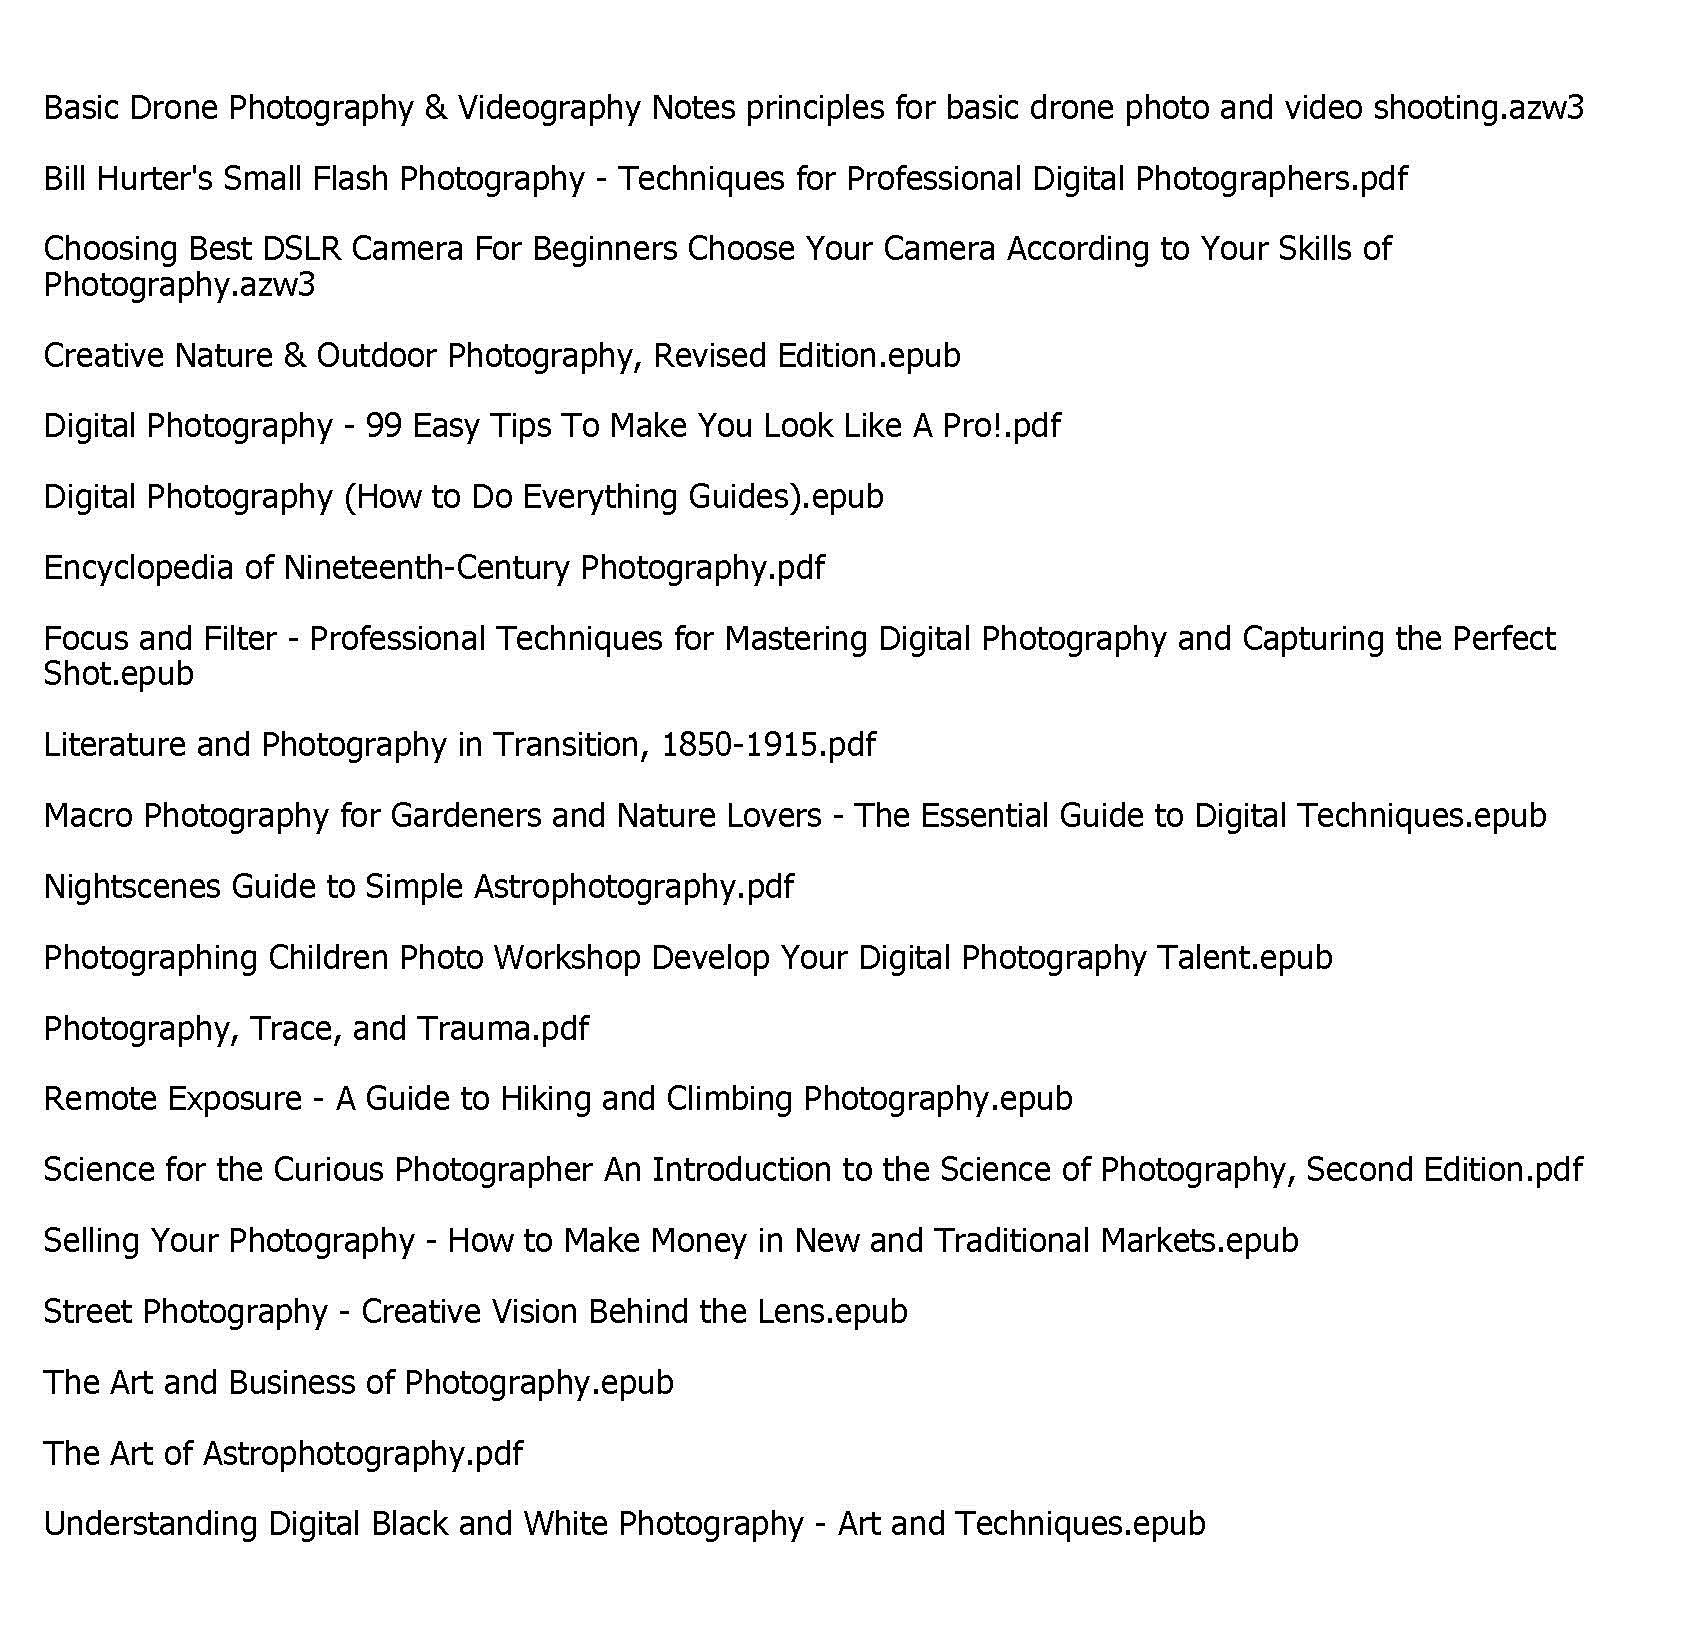 The art of photography pdf